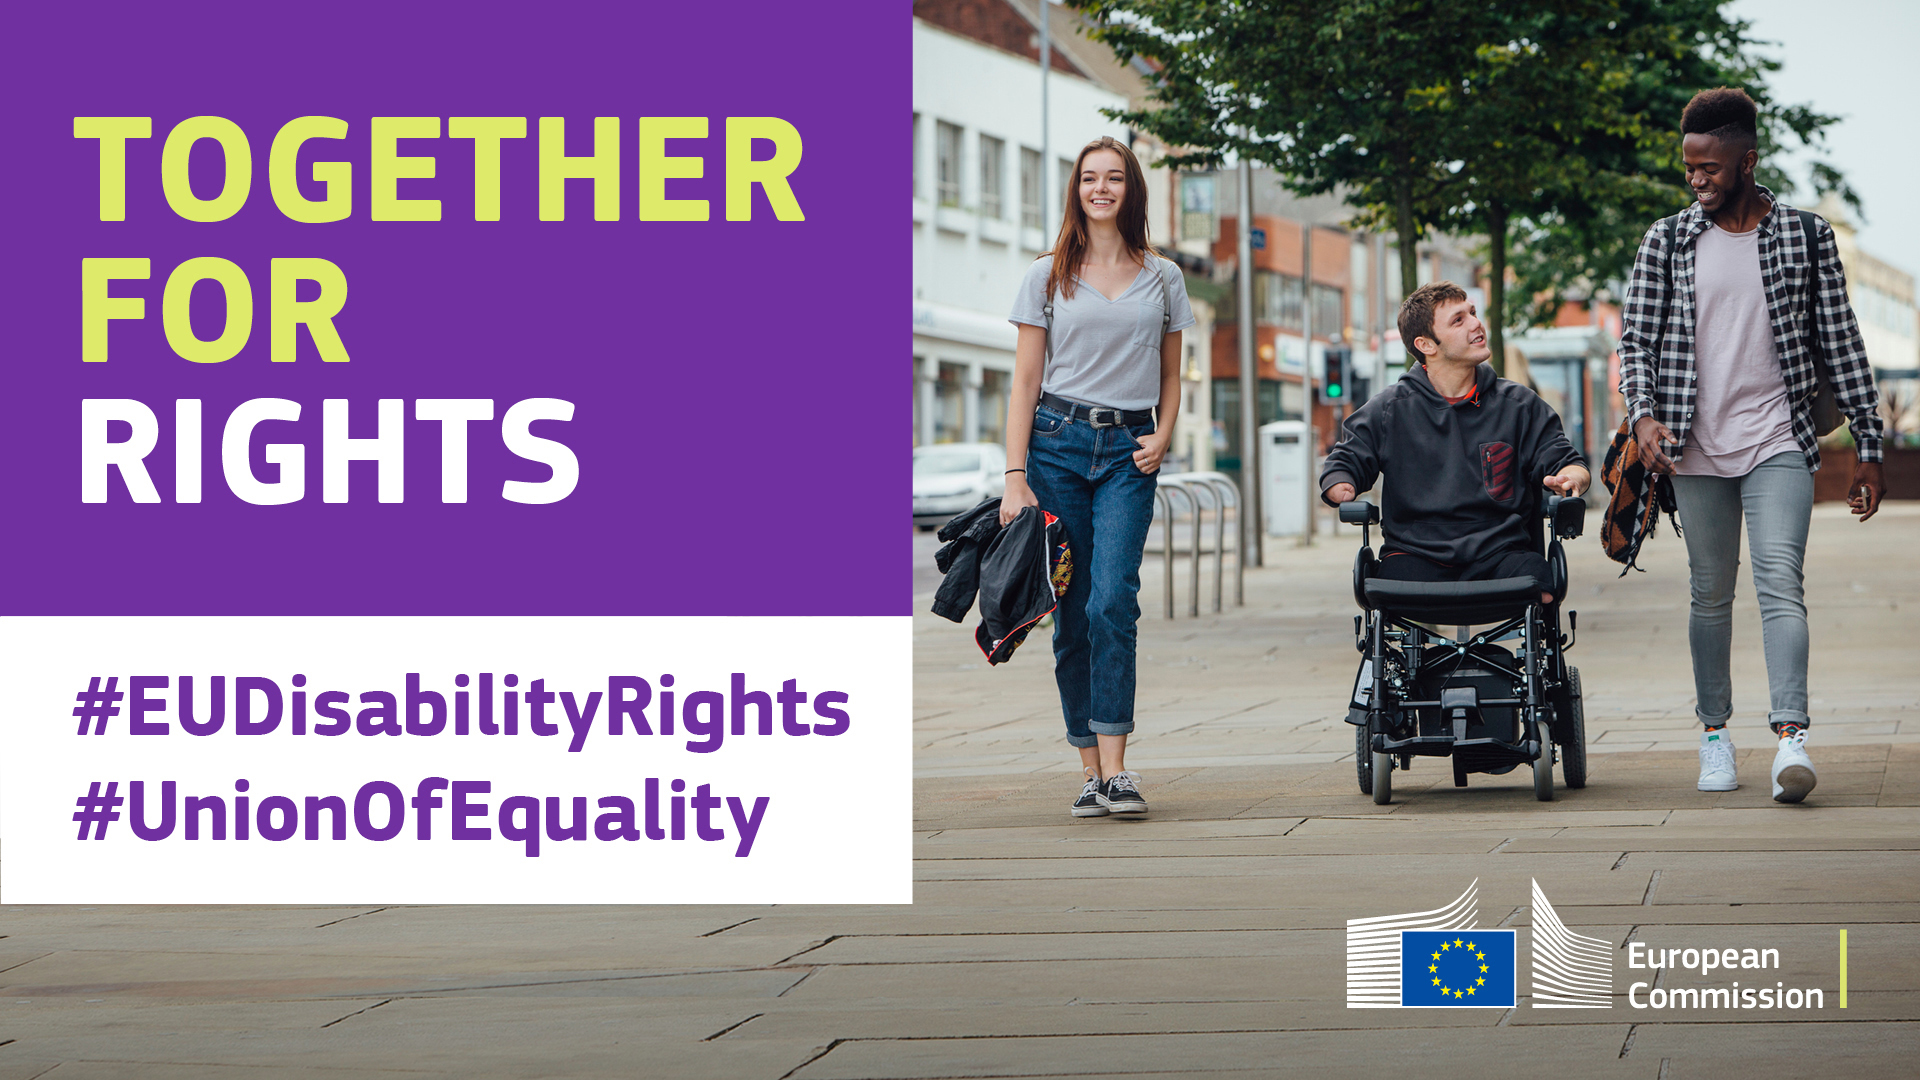 Together for Rights banner representing friend walking on a street, one of them on a wheel chair. #EUDisability Rights, #UnionofEquality